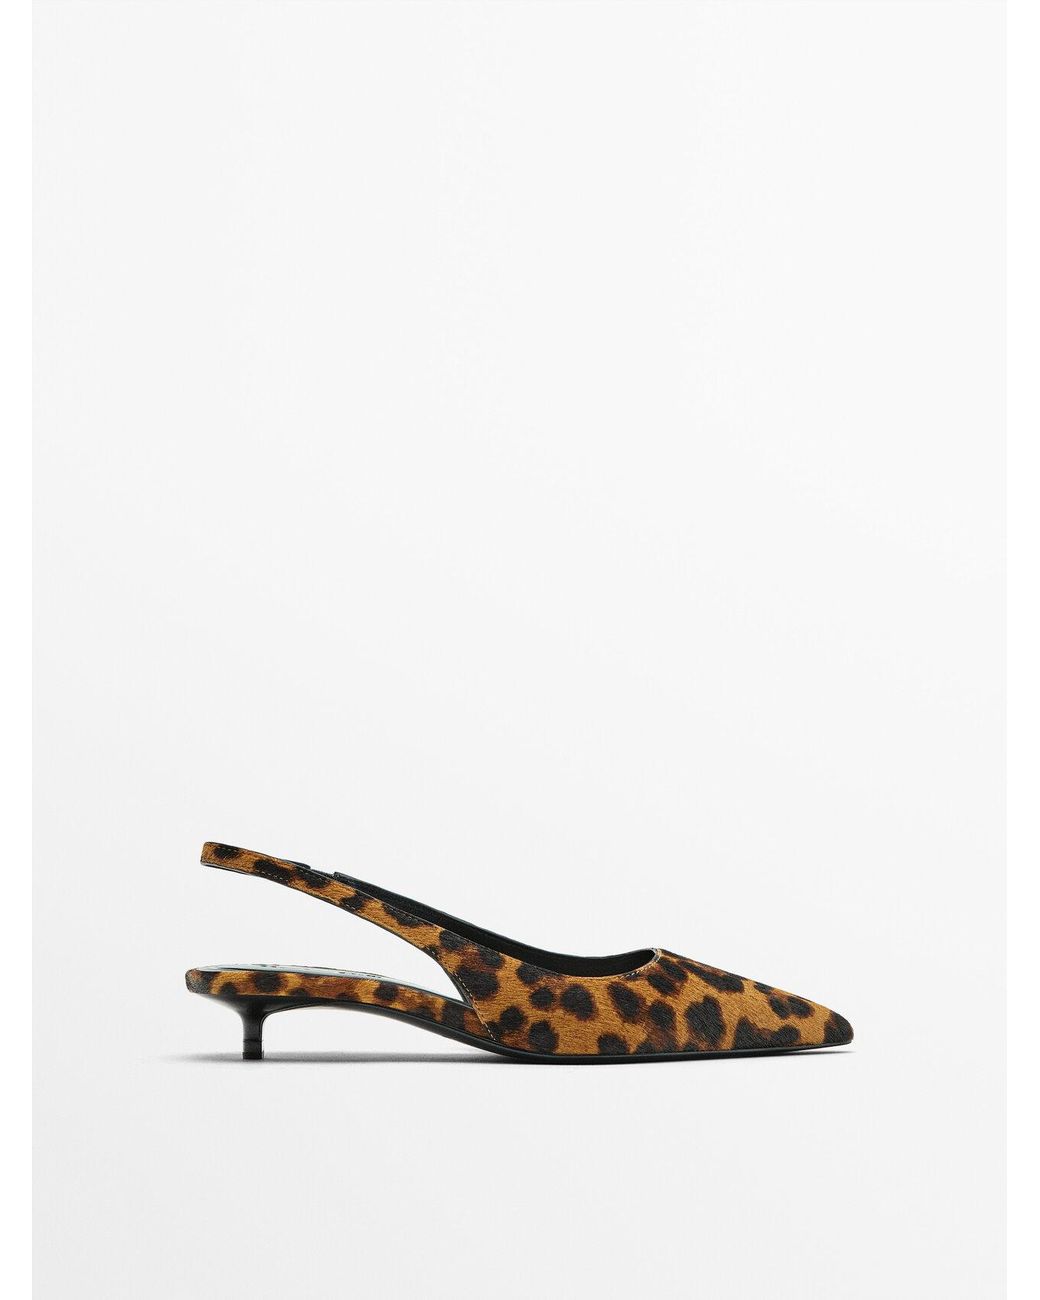 MASSIMO DUTTI High-Heel Animal Print Slingback Shoes in White | Lyst